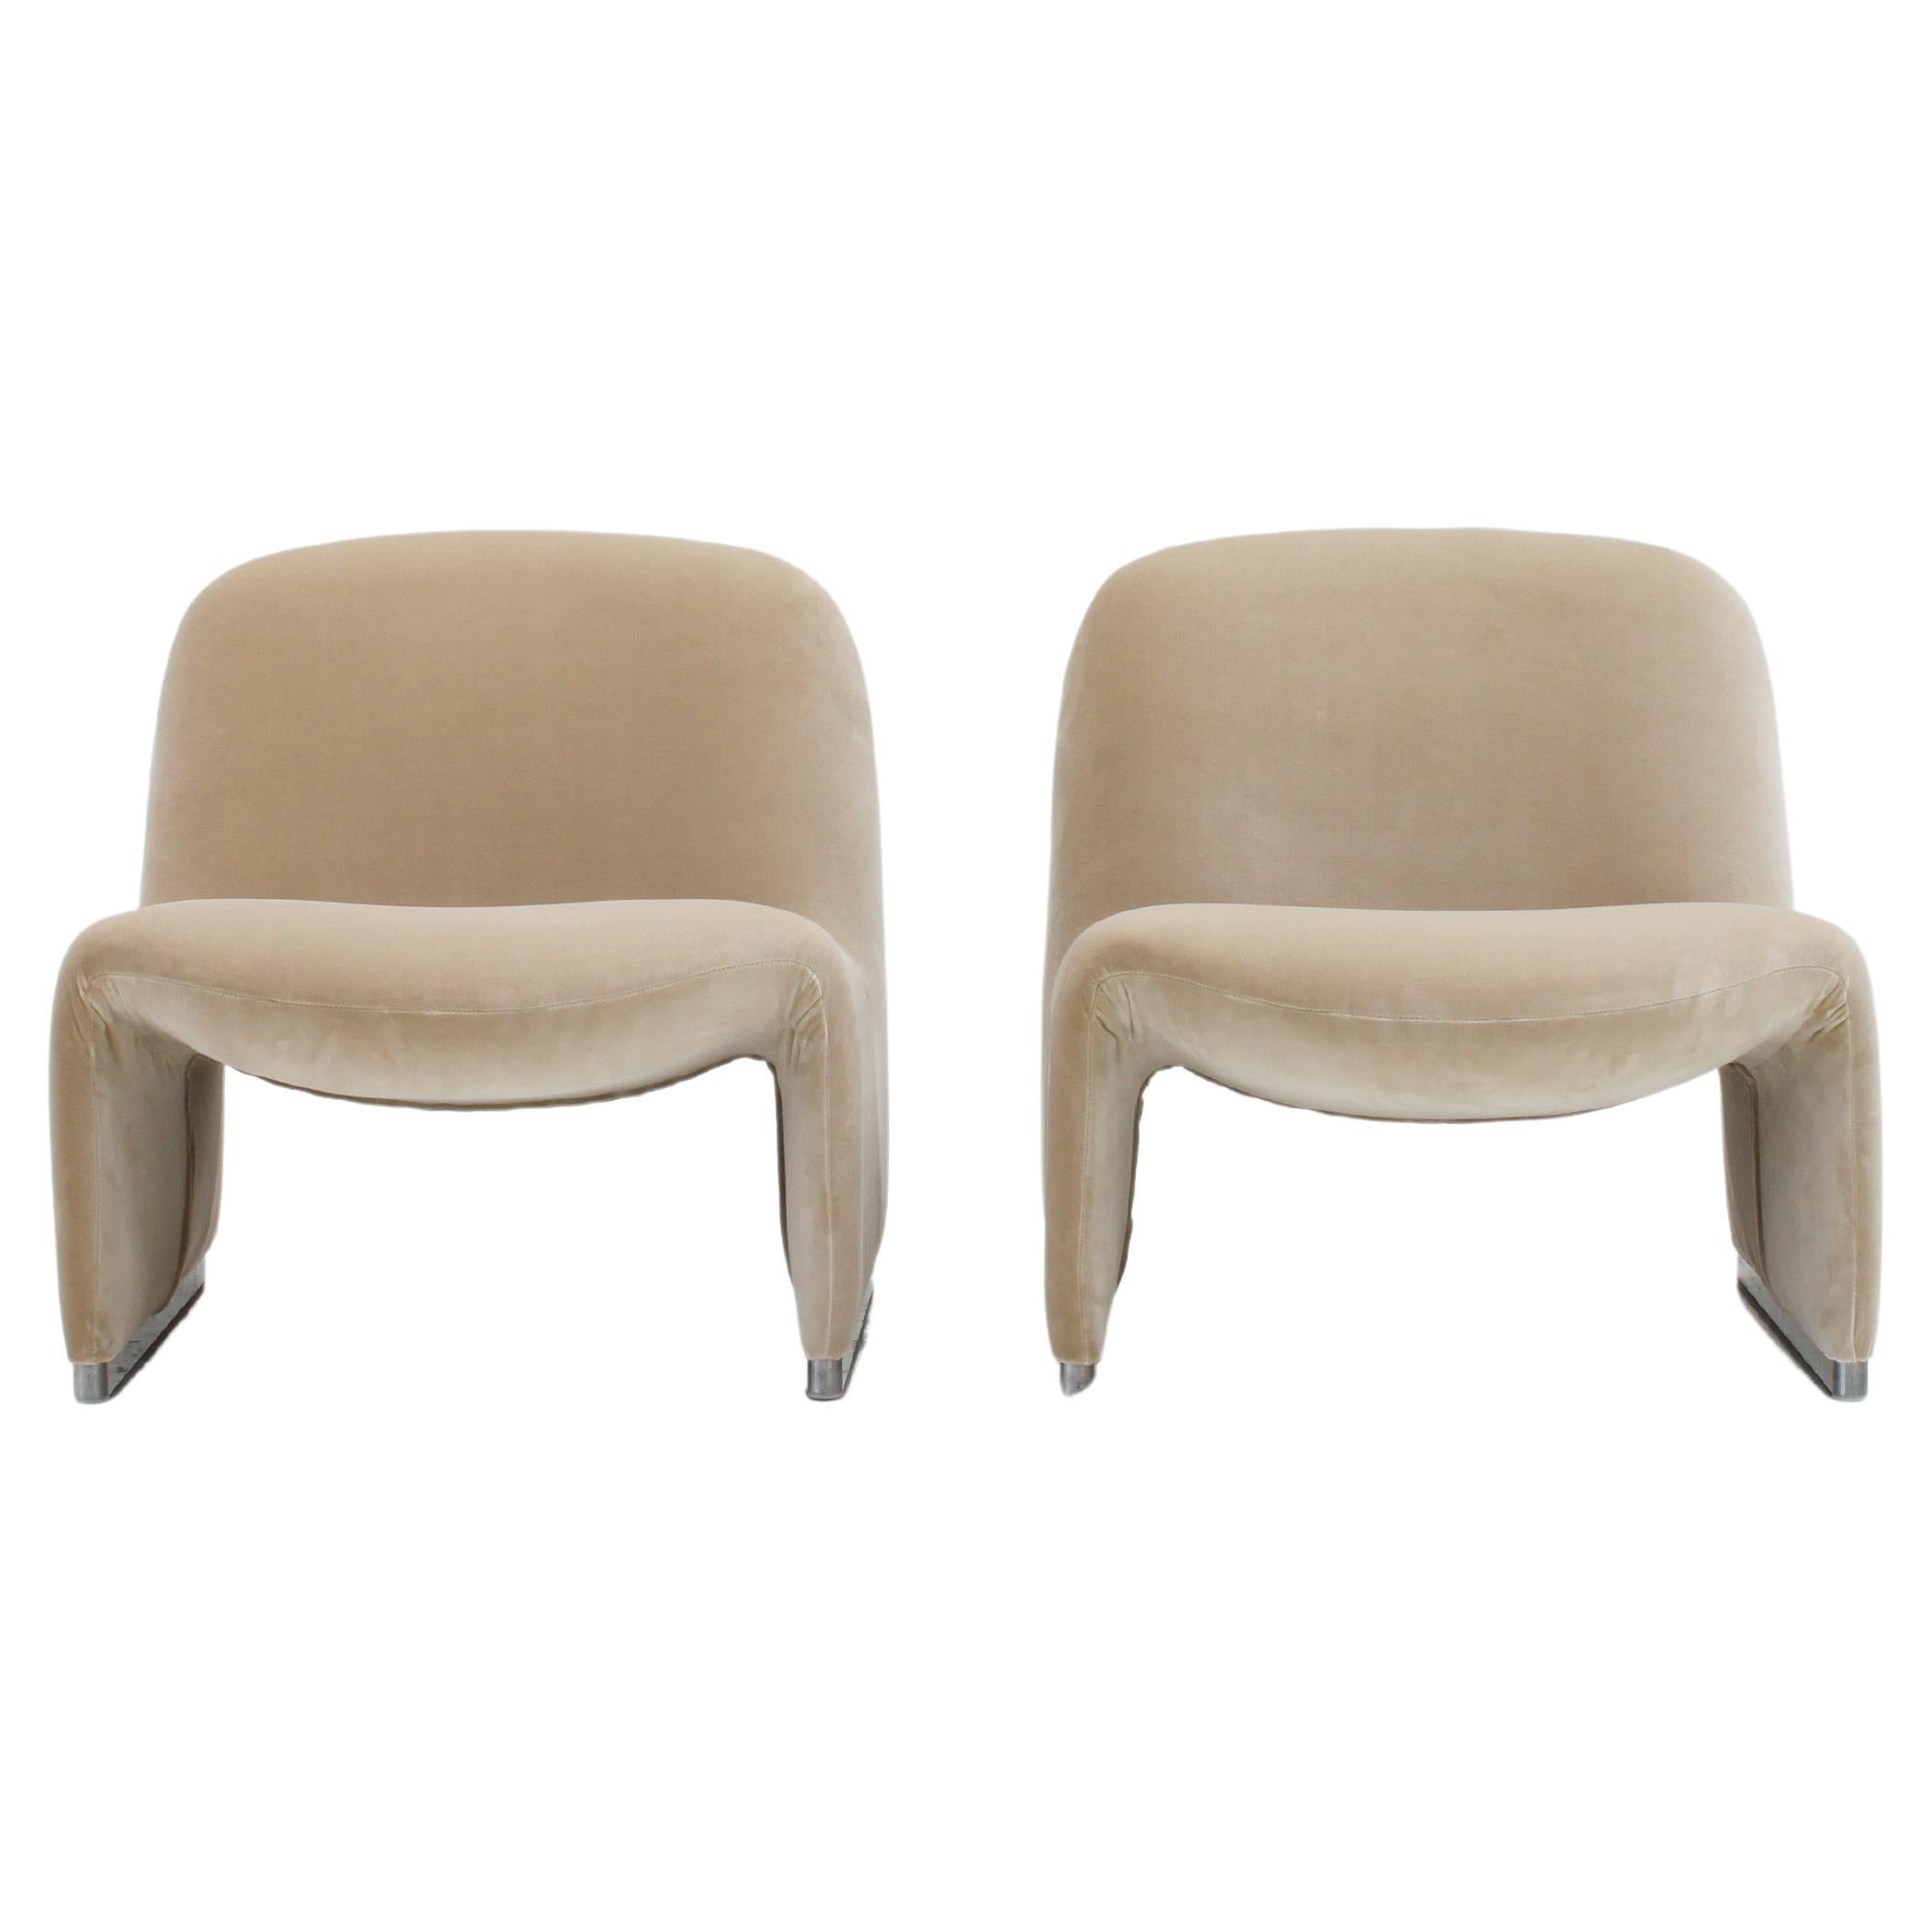 Pair of Giancarlo Piretti �“Alky” Chairs - PREPARED FOR UPHOLSTERY